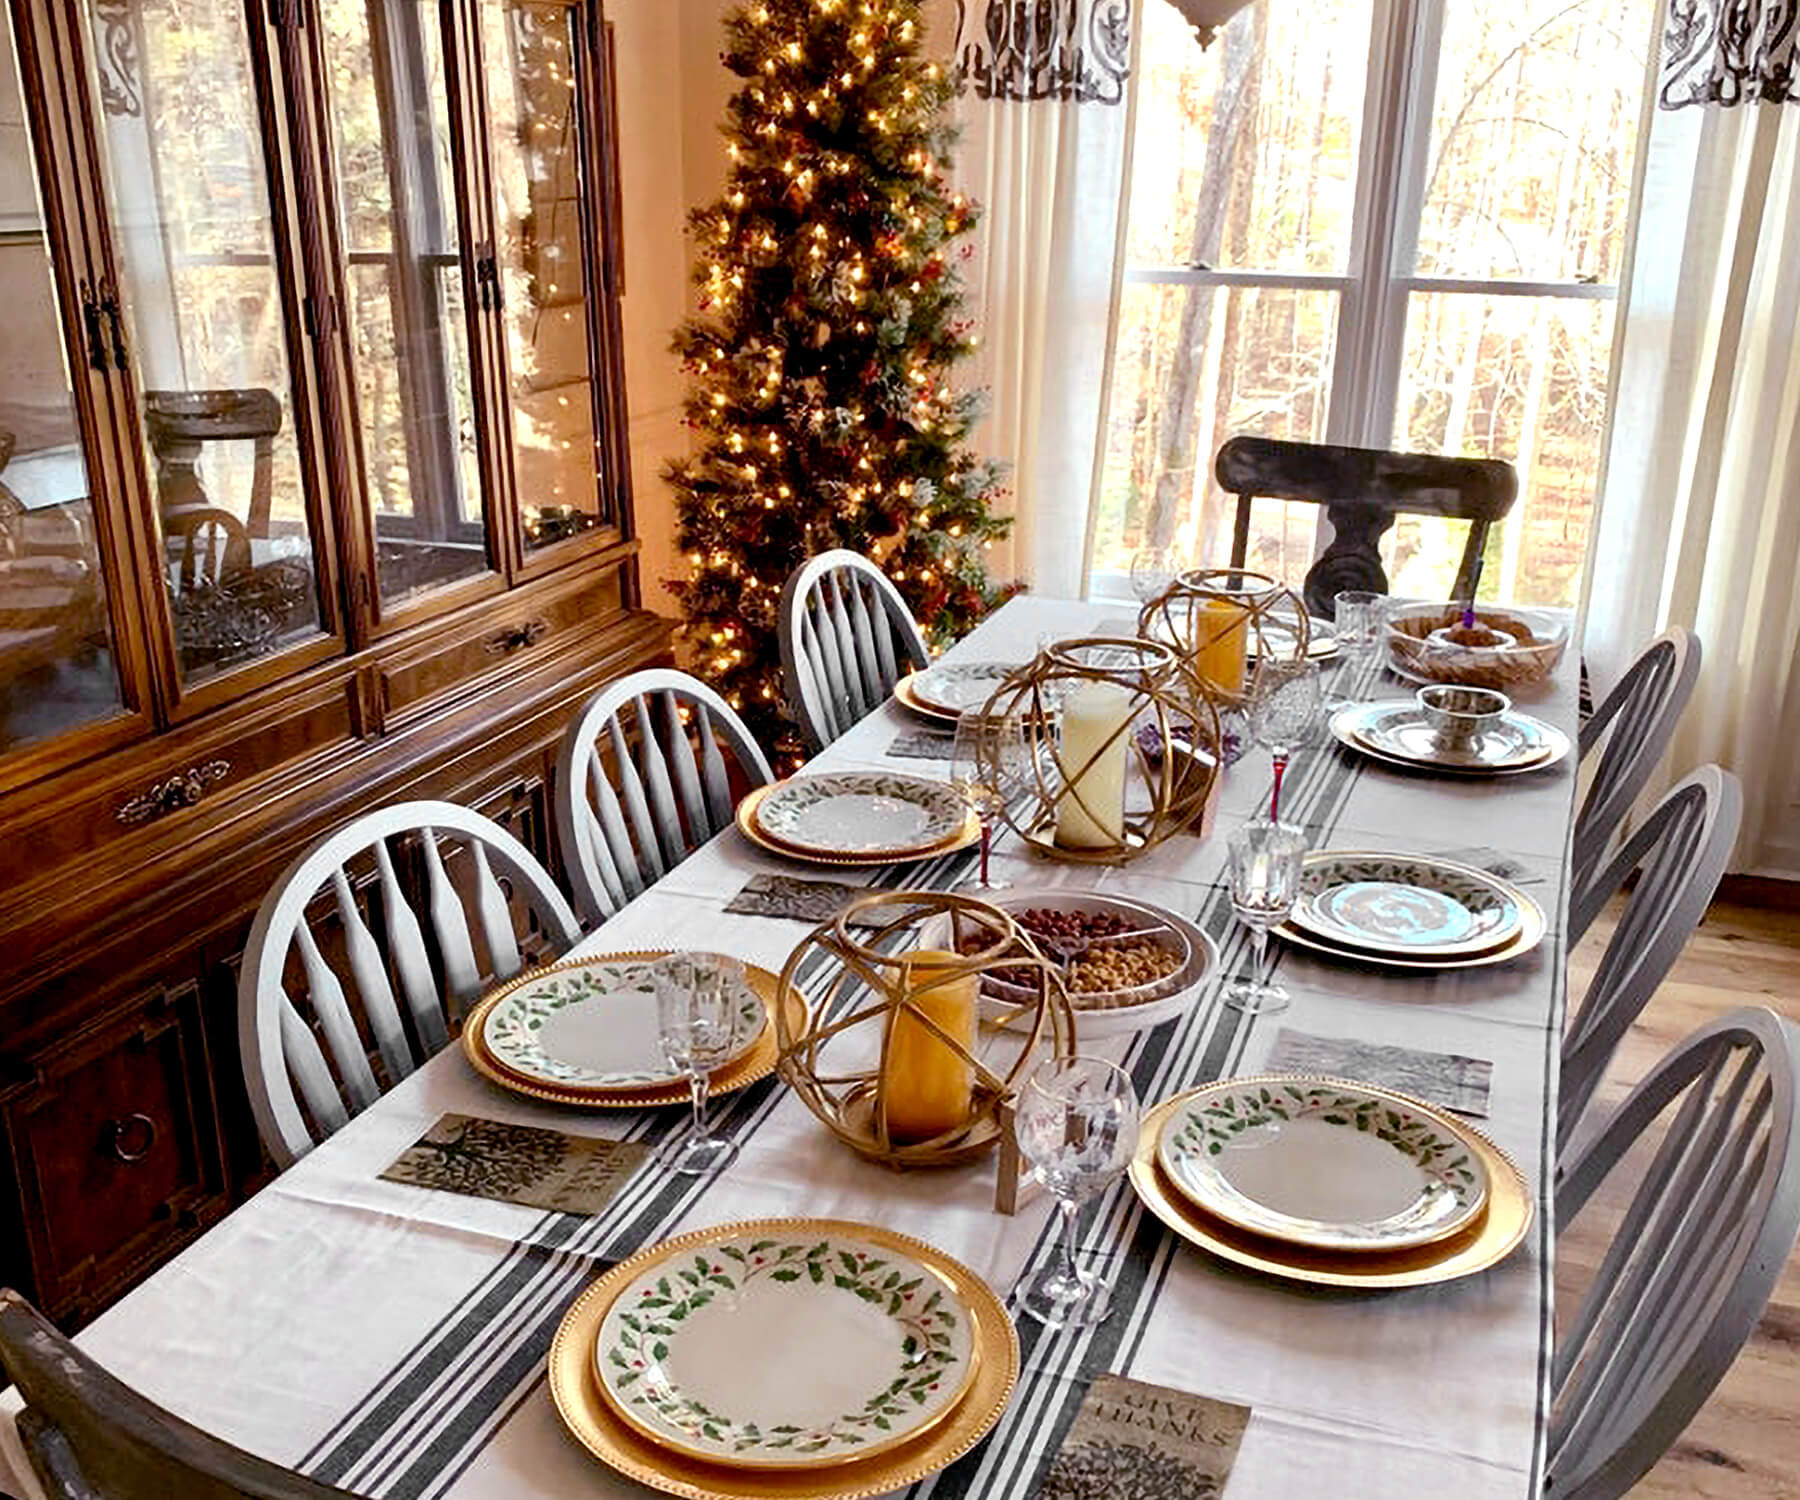 Festive table setting featuring the farmhouse tablecloth and a Christmas tree in the background